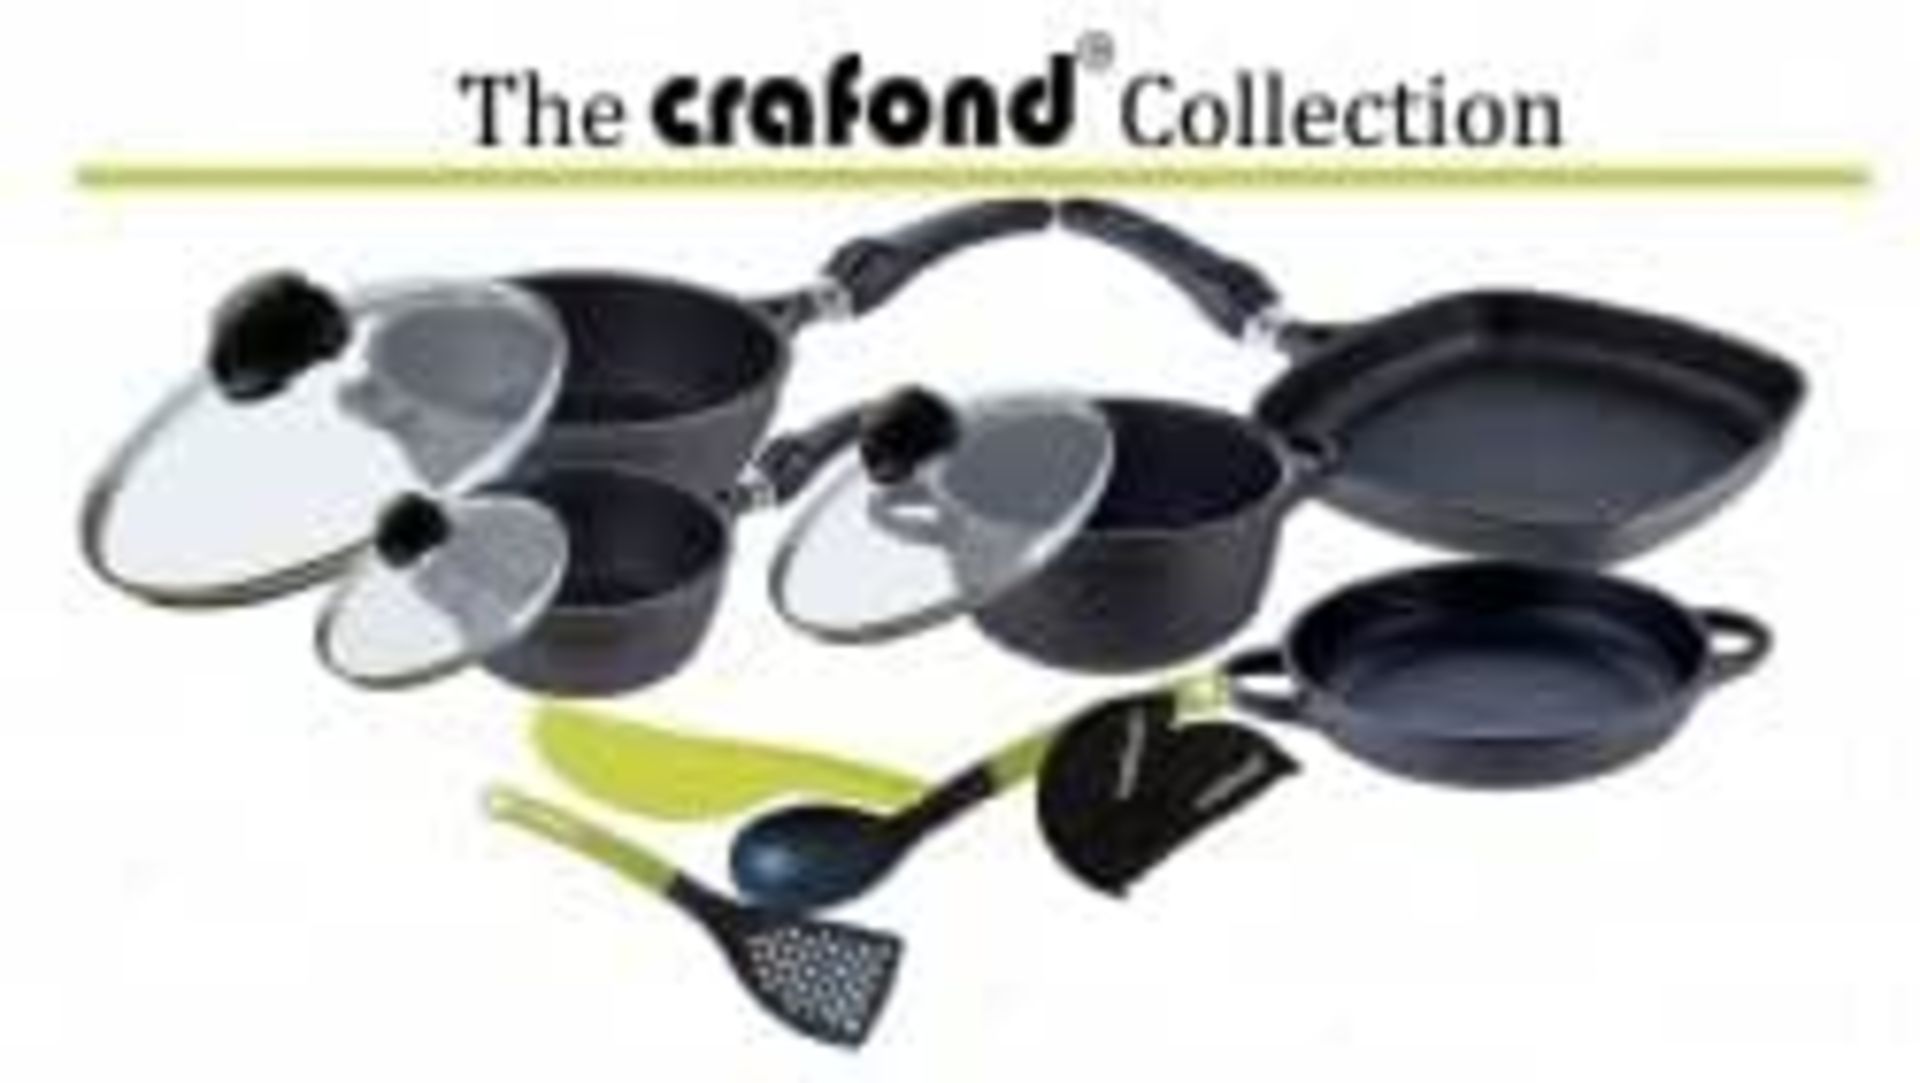 Crafond 24cm Frying Pan with detachable handle and lid. - Image 3 of 3